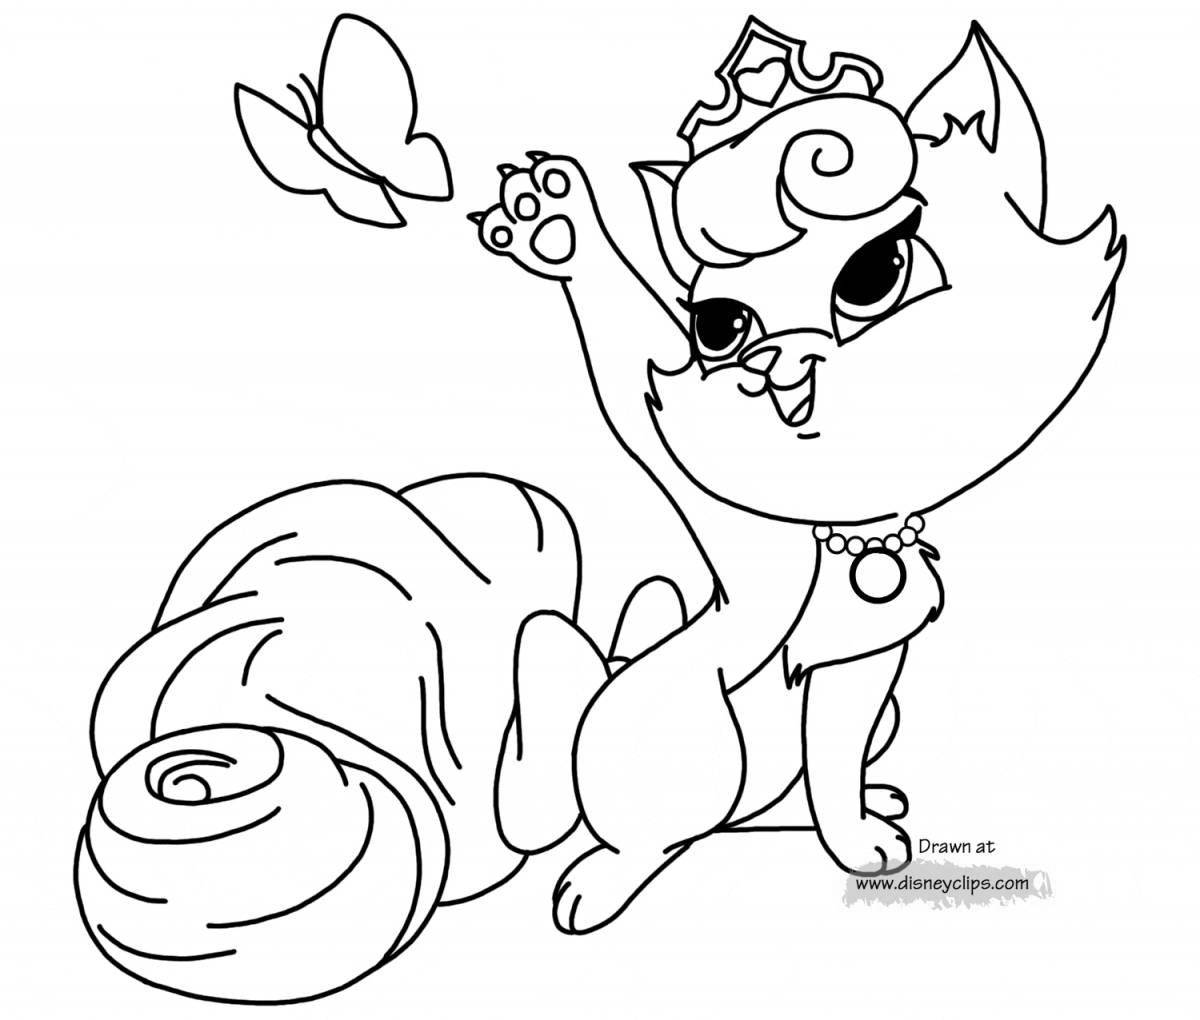 Glitter queen cat coloring page